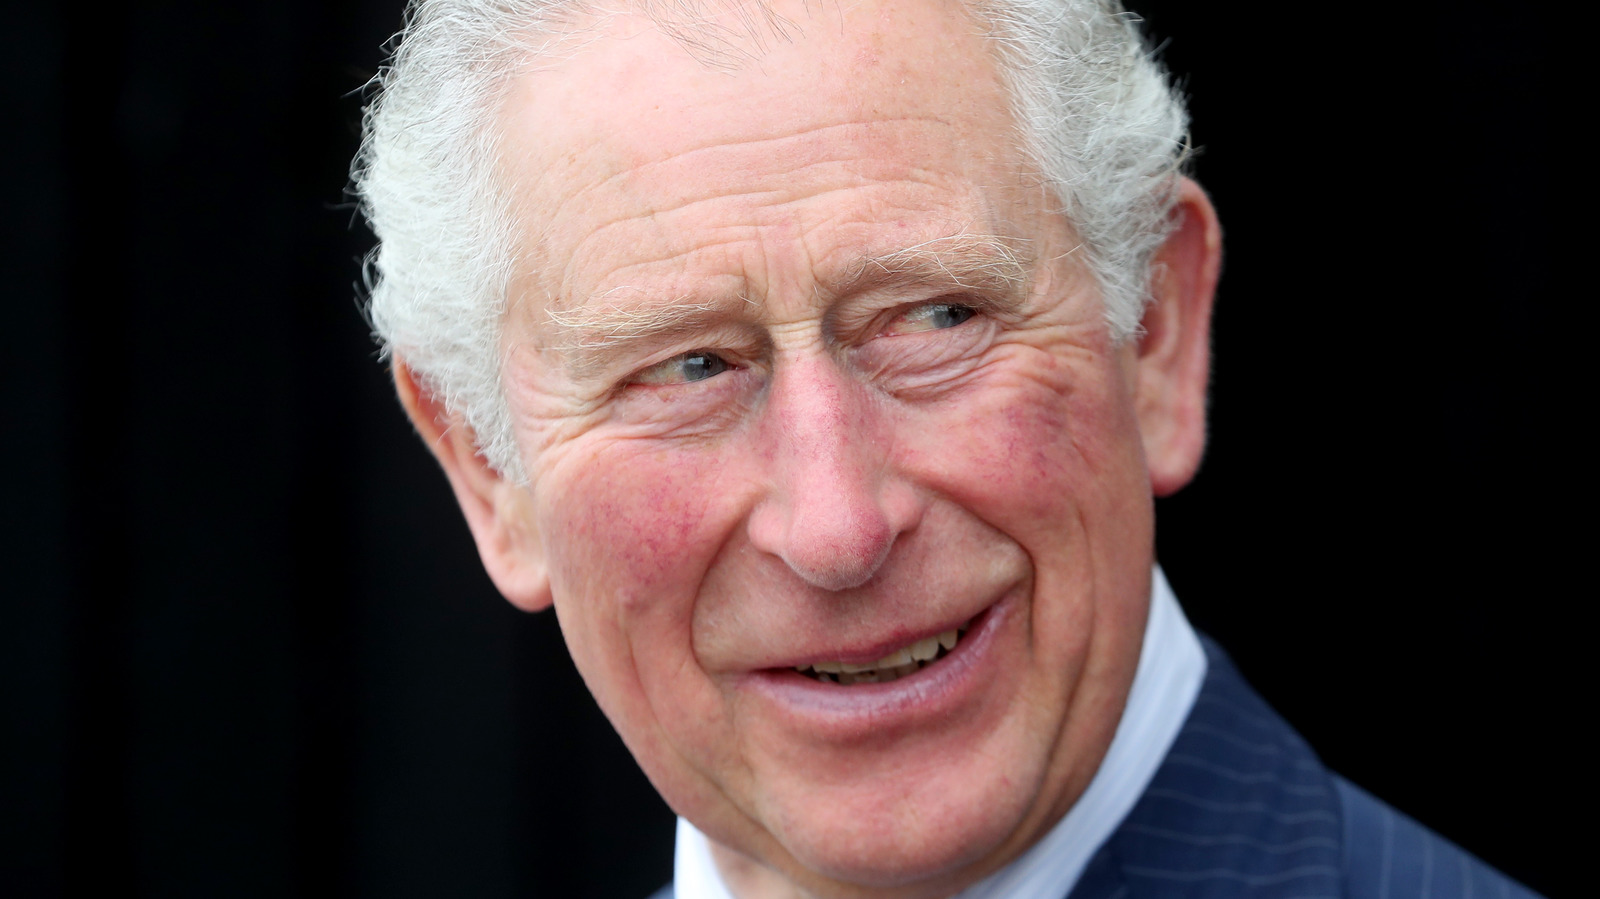 Princes Charles Was Just Asked About Harry And Meghan. Here's How He Replied